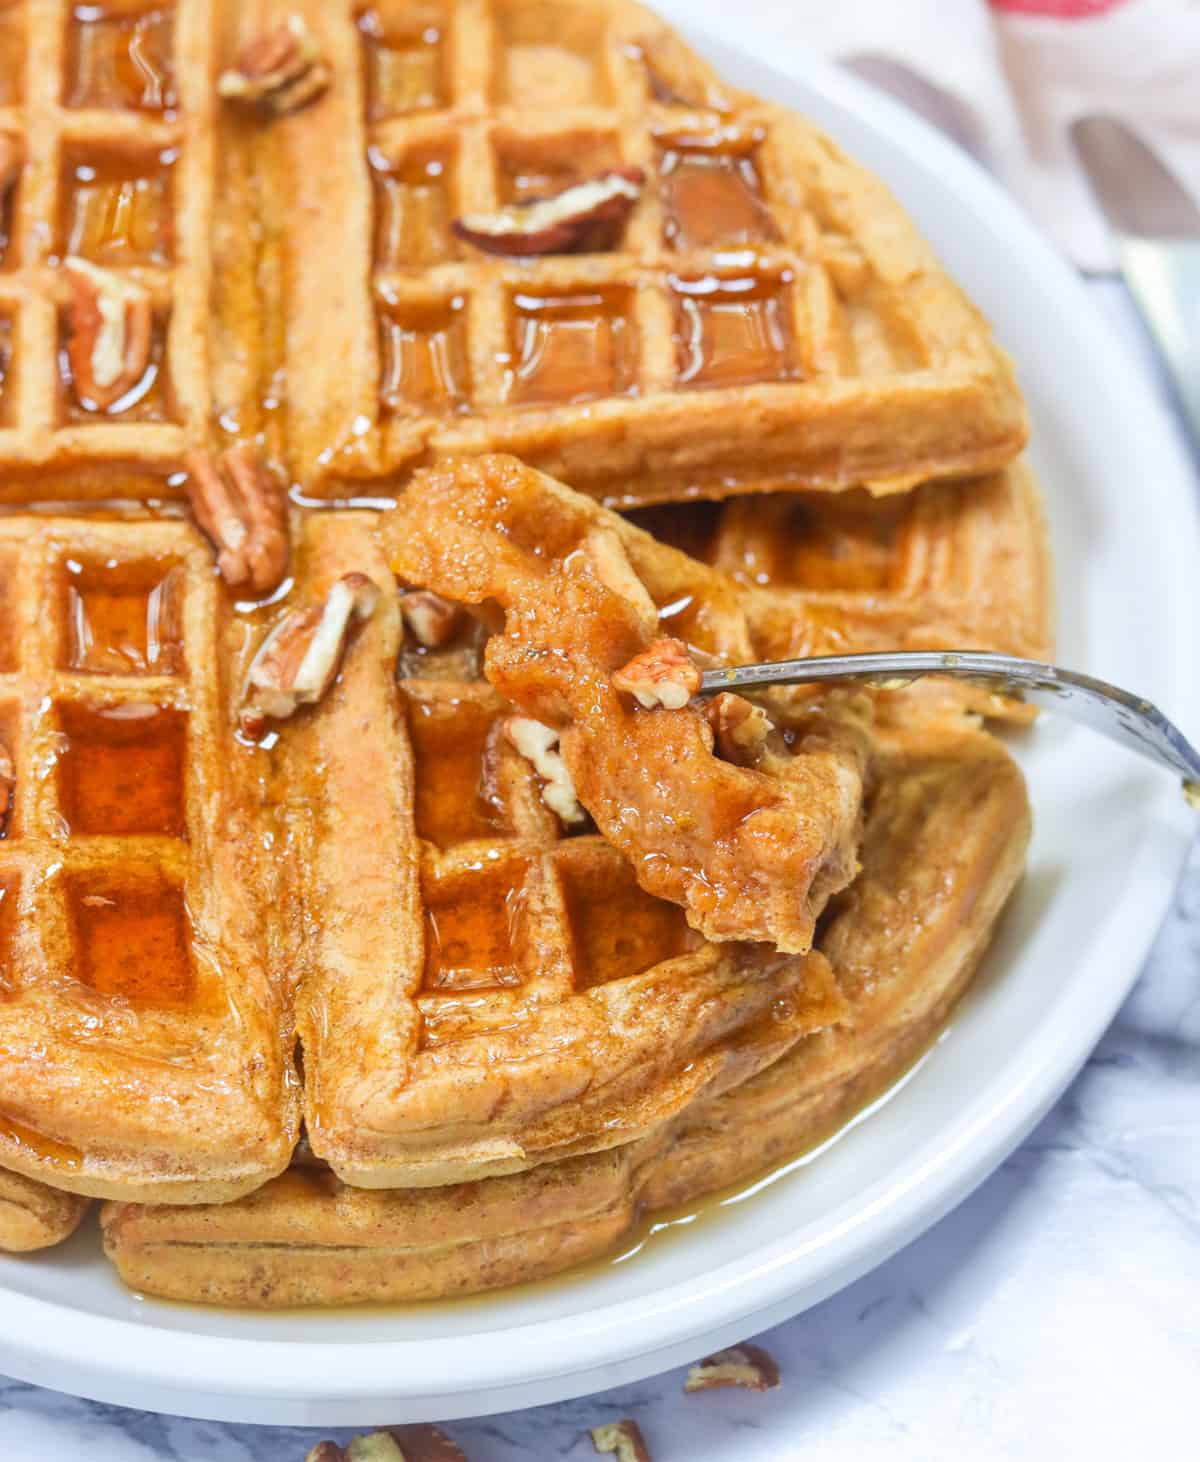 Taking a ridiculously delicious bite of maple syrup smothered sweet potato waffles